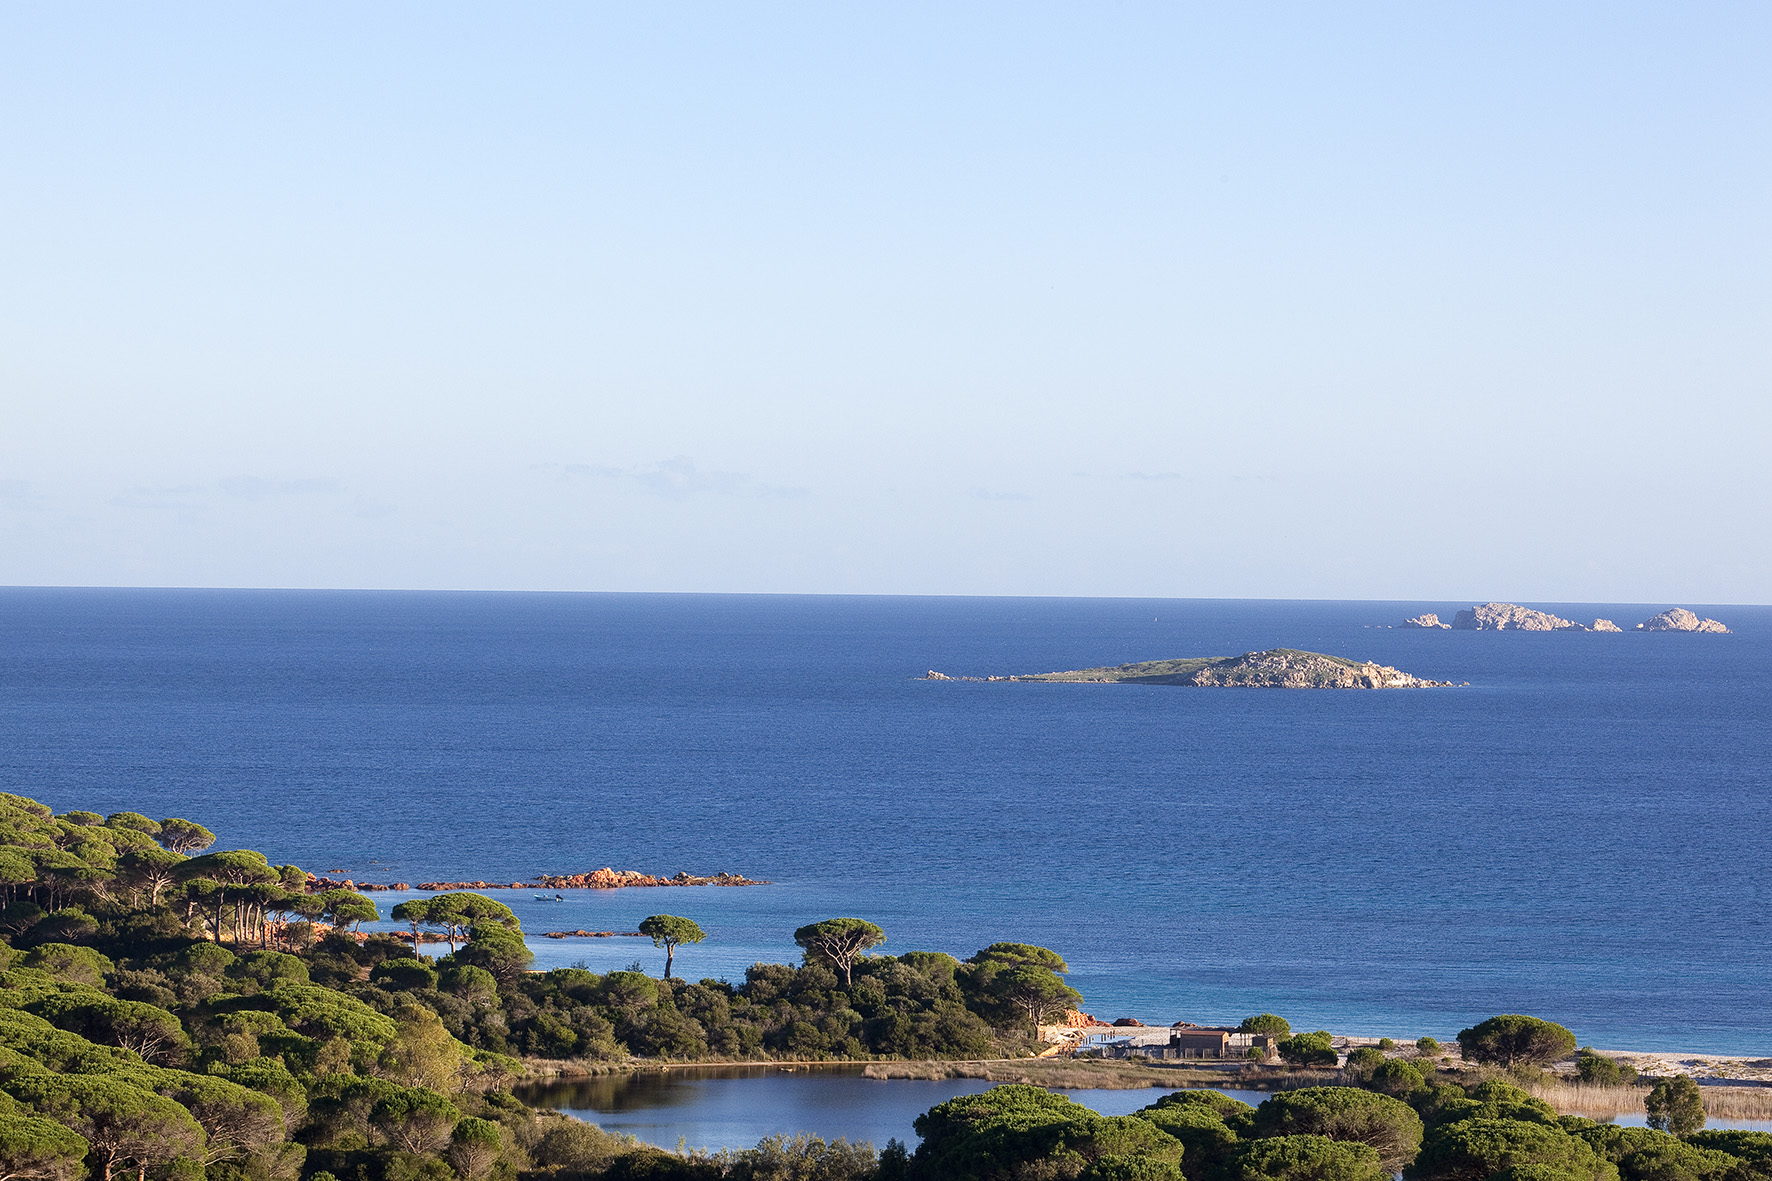 view over the sea from Les Bergeries de Palombaggia hotel in Corsica, France